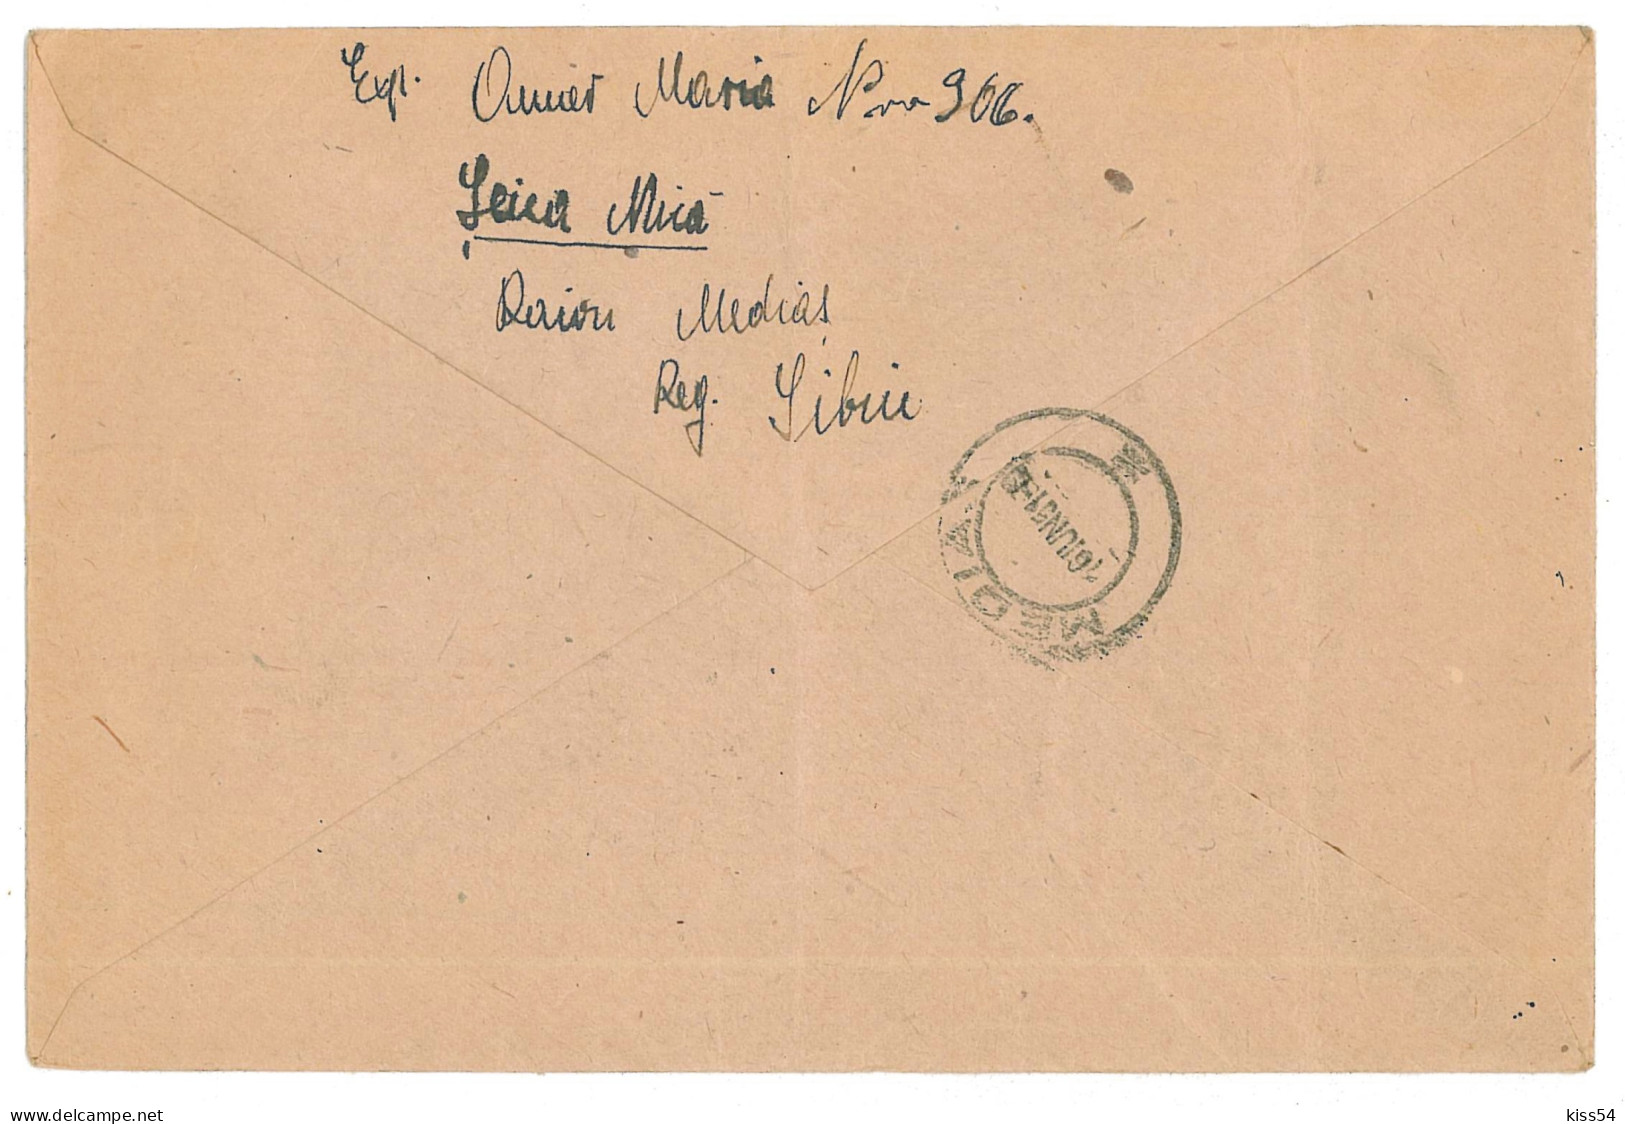 CIP 18 - 204-a SEICA-MICA, Sibiu - Cover - Used - 1951 - Covers & Documents